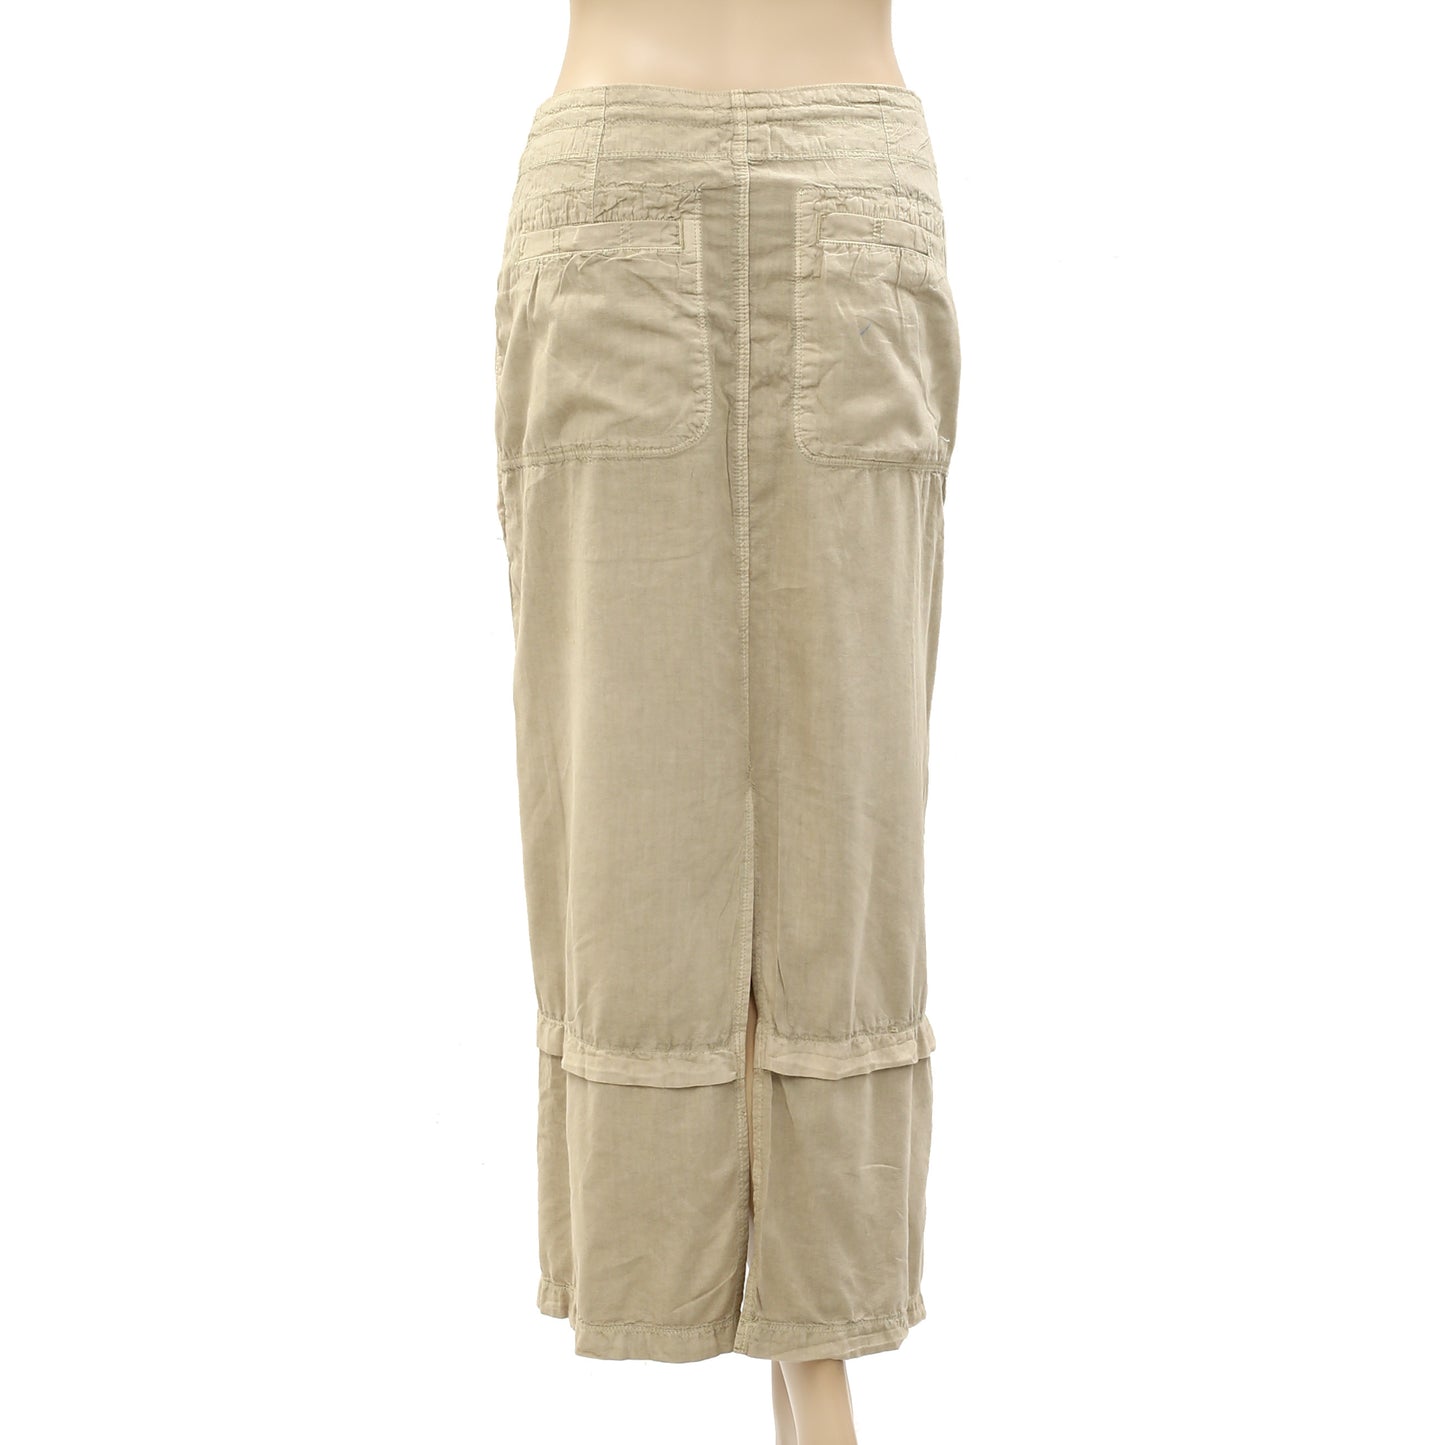 Free People Lizzie Parachute Maxi Skirt